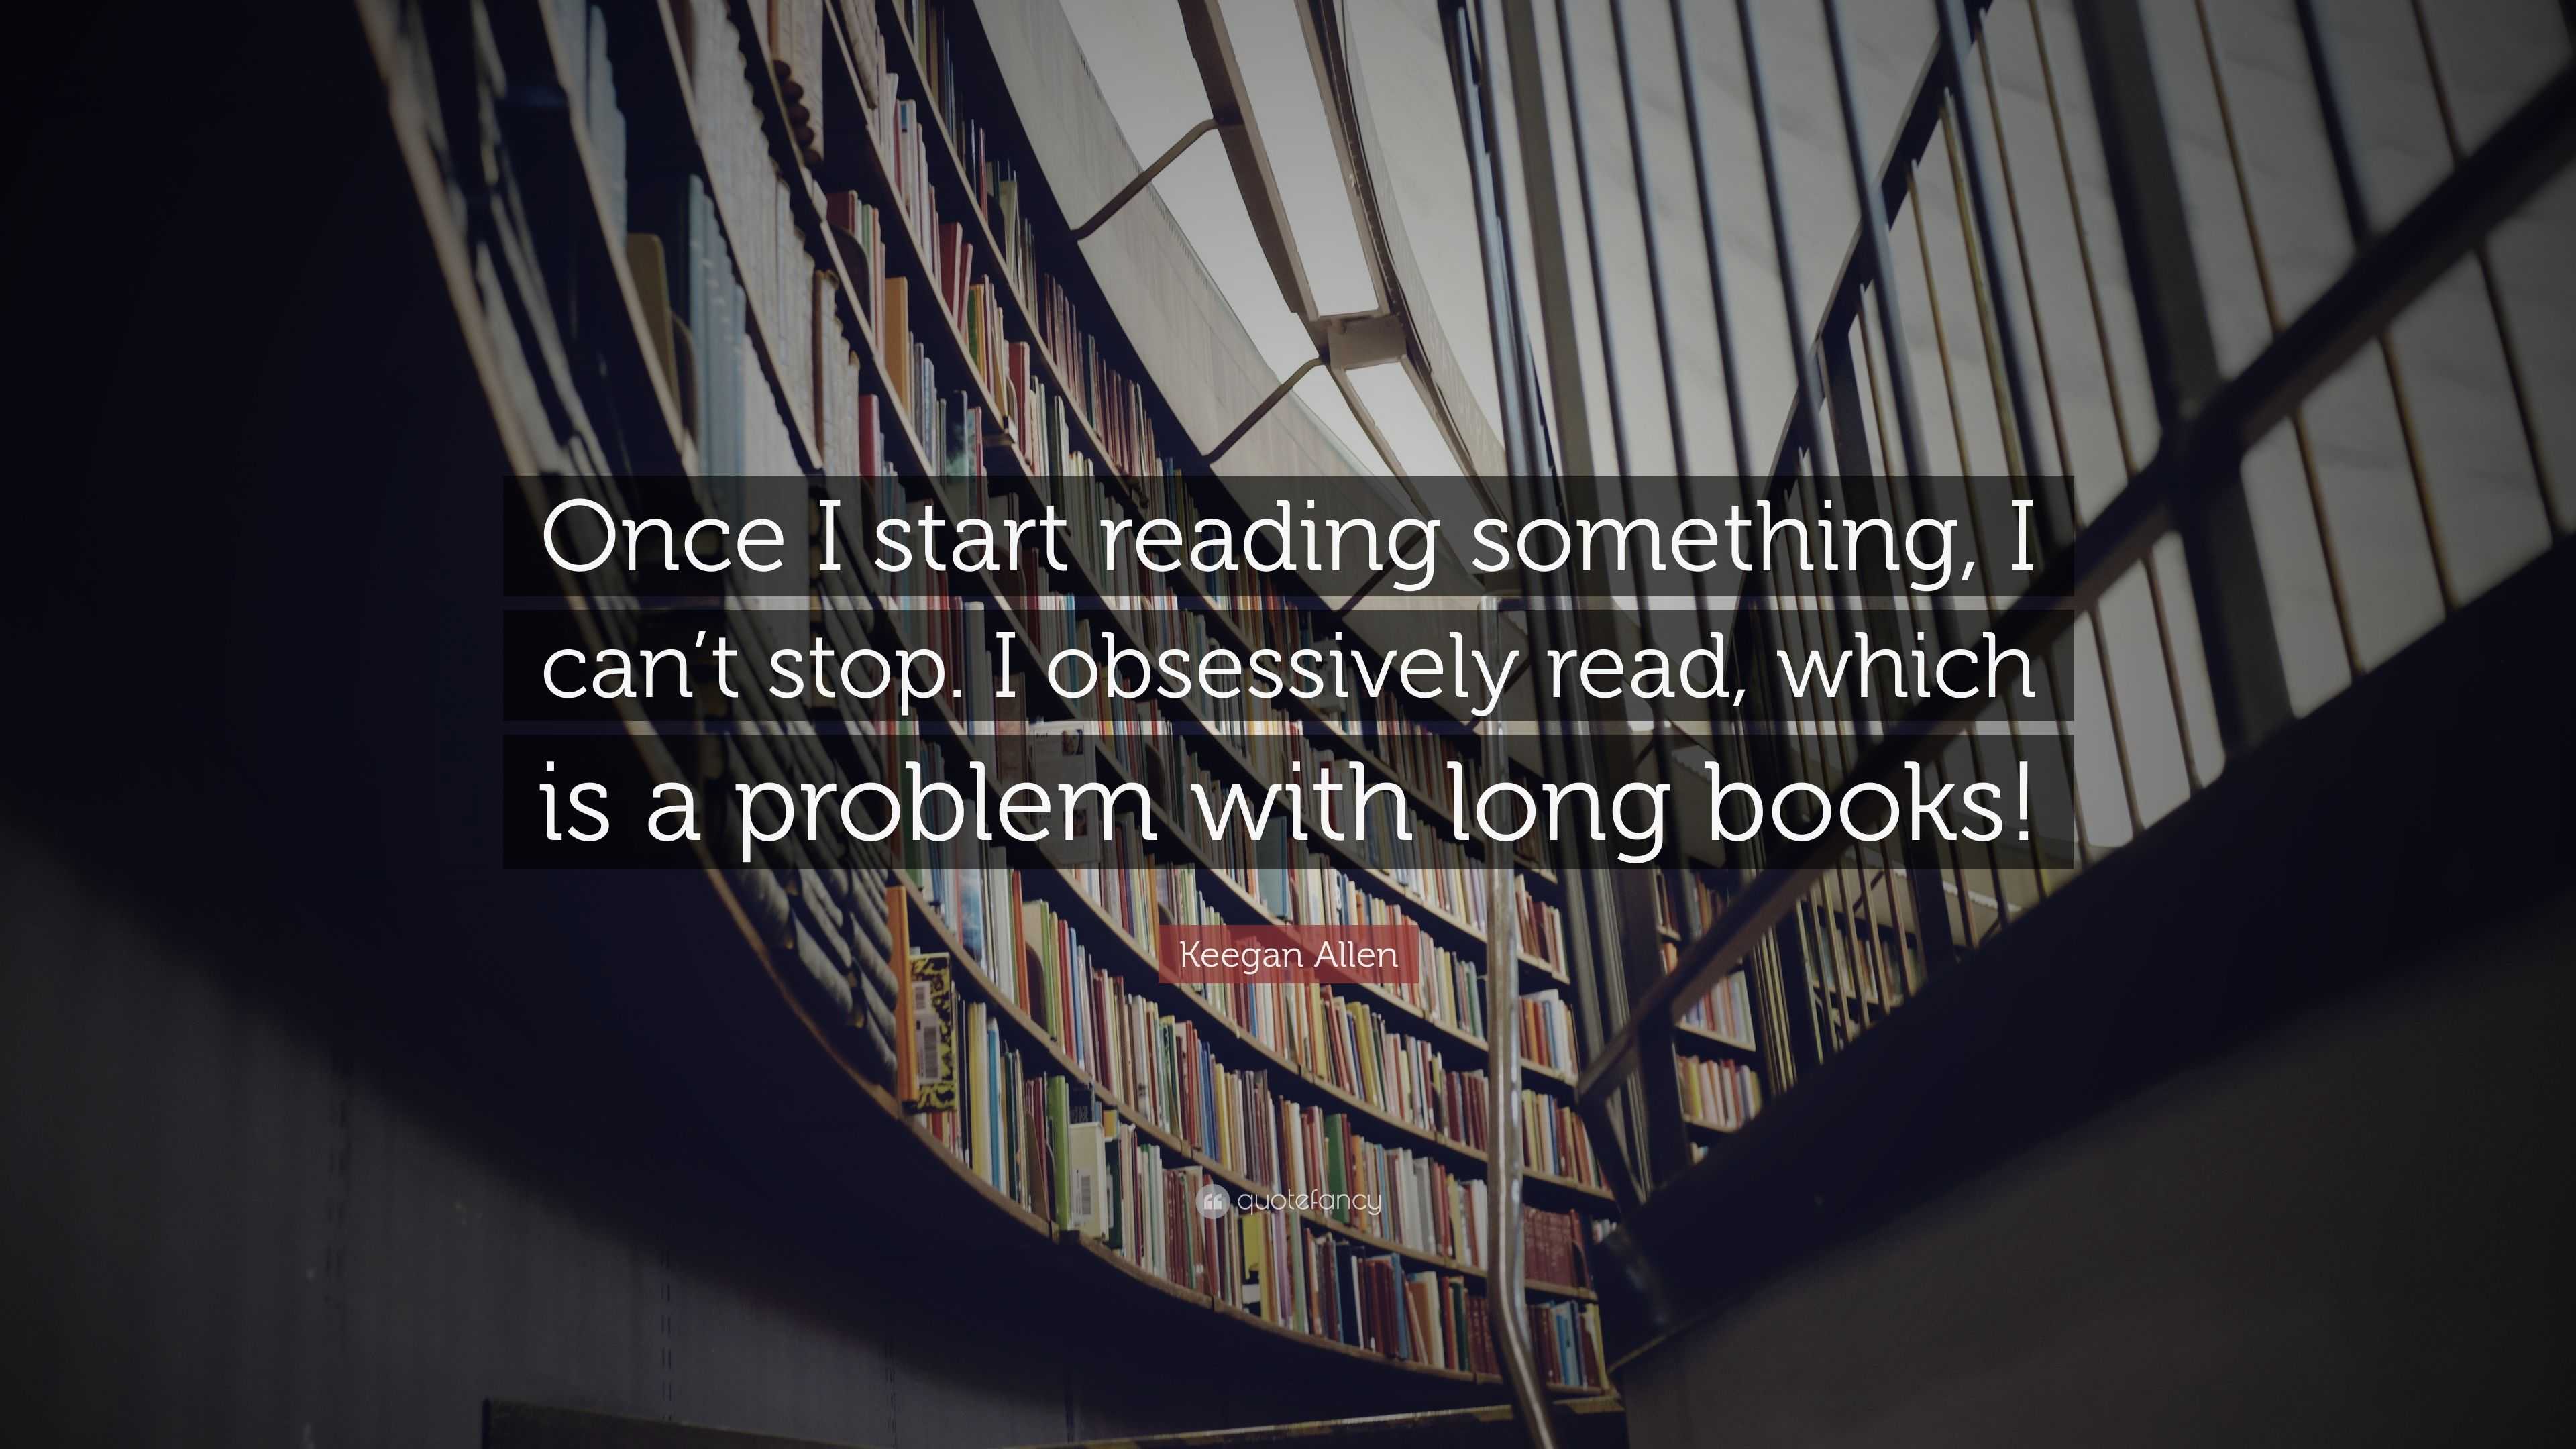 Why I Can't Stop Reading